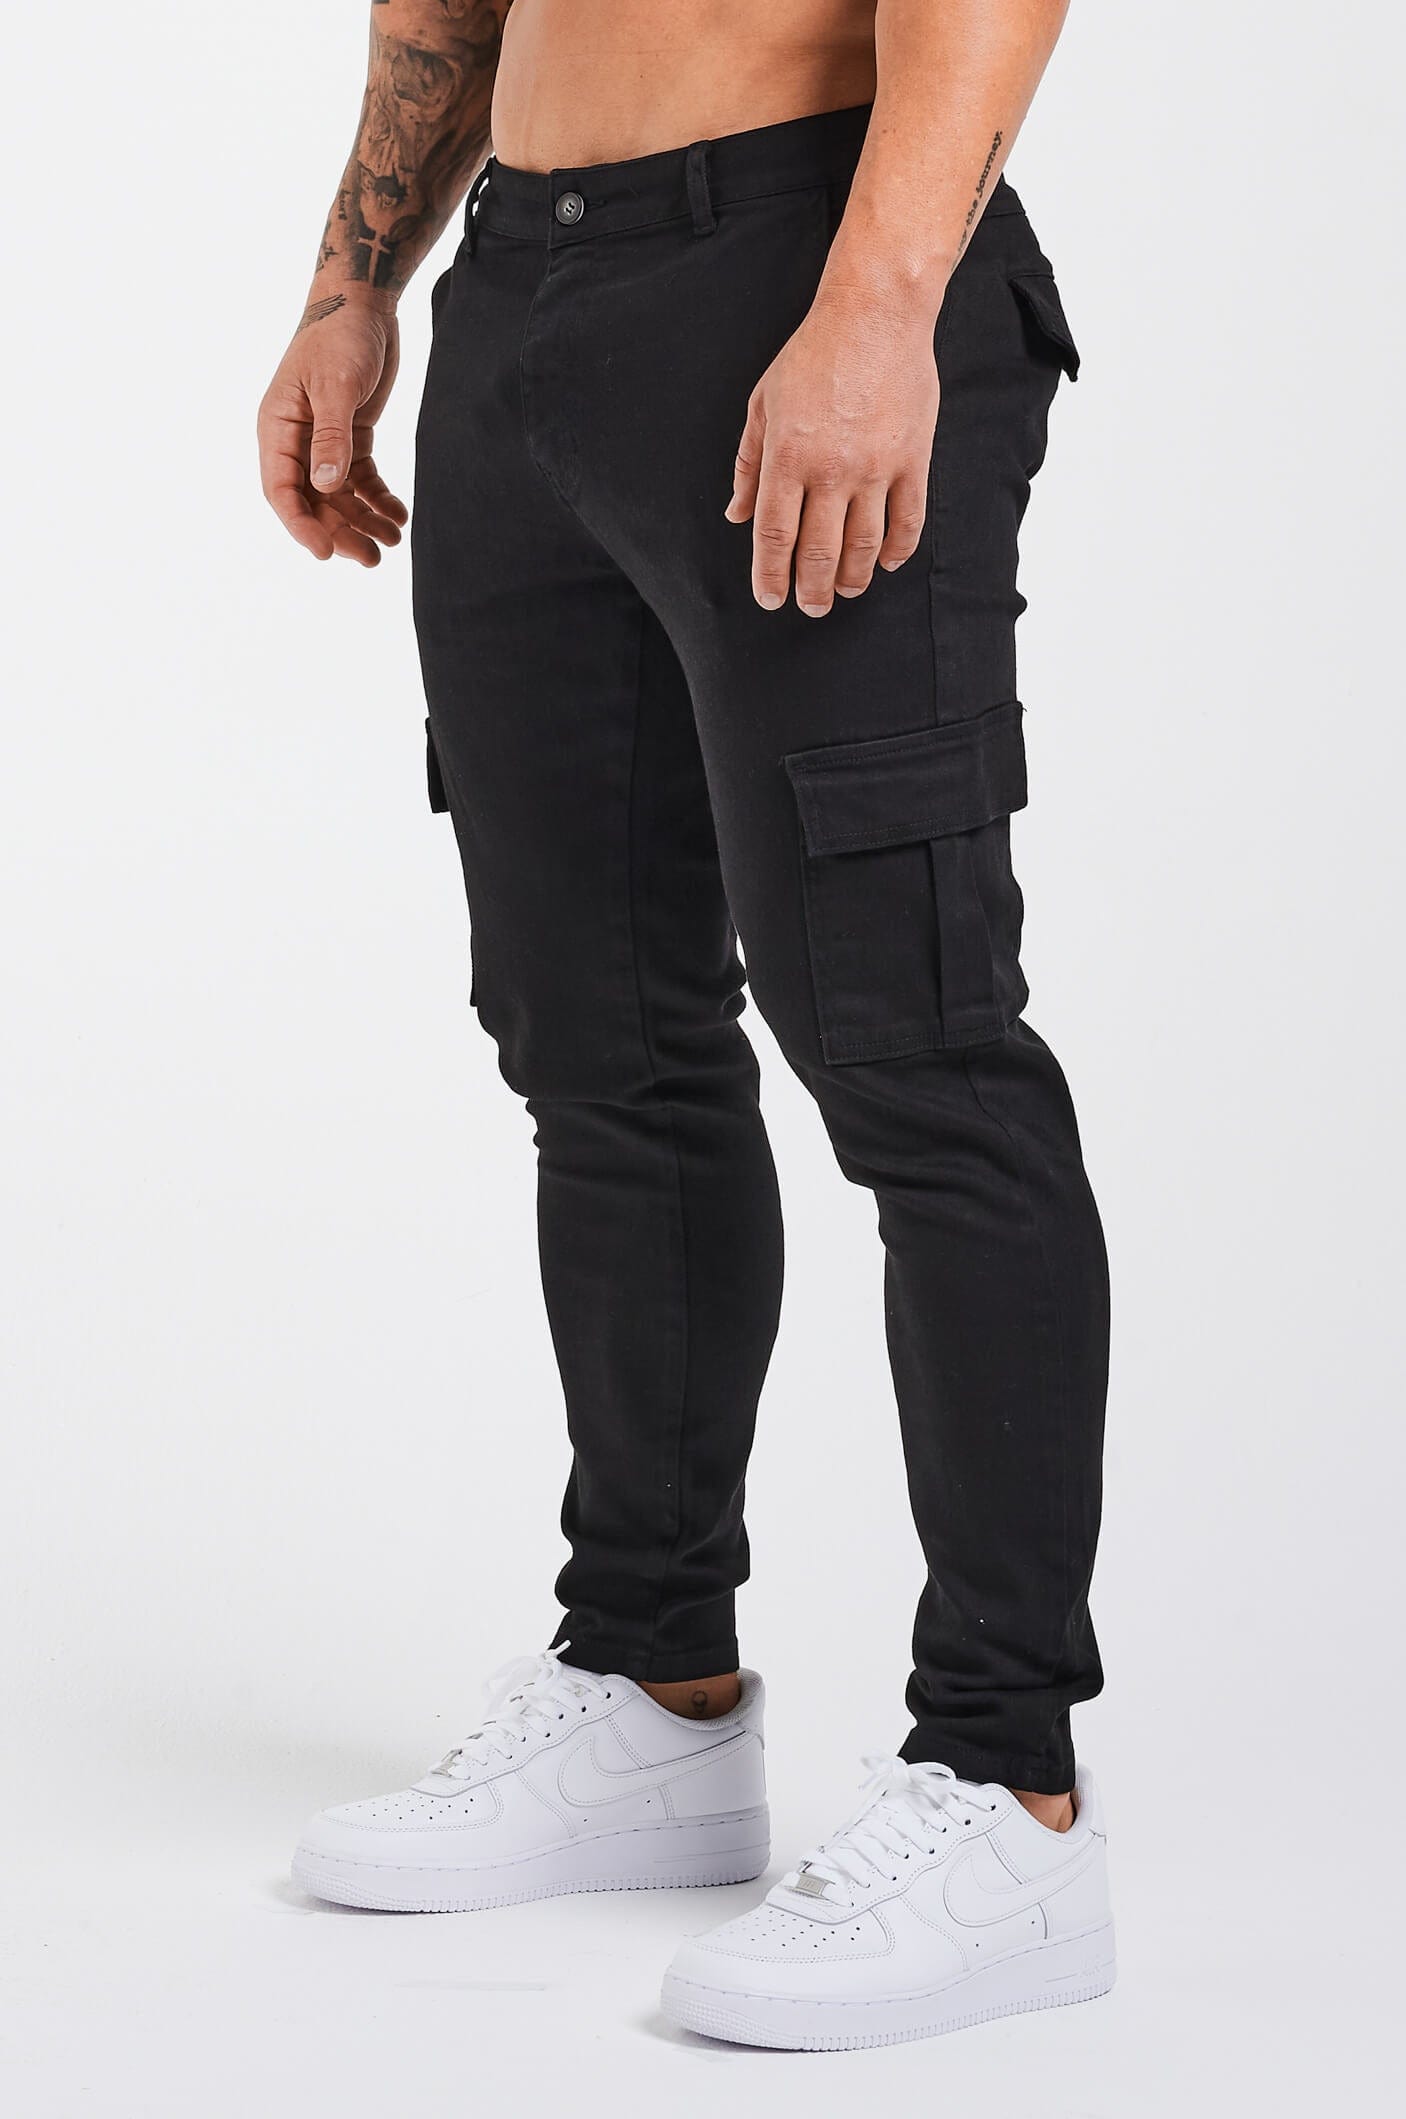 Military Cargo Jogger Pants For Men Slim Fit Autumn Skinny Mens Skinny  Cargo Trousers With Hip Hop Style H1223 From Mengyang04, $12.2 | DHgate.Com